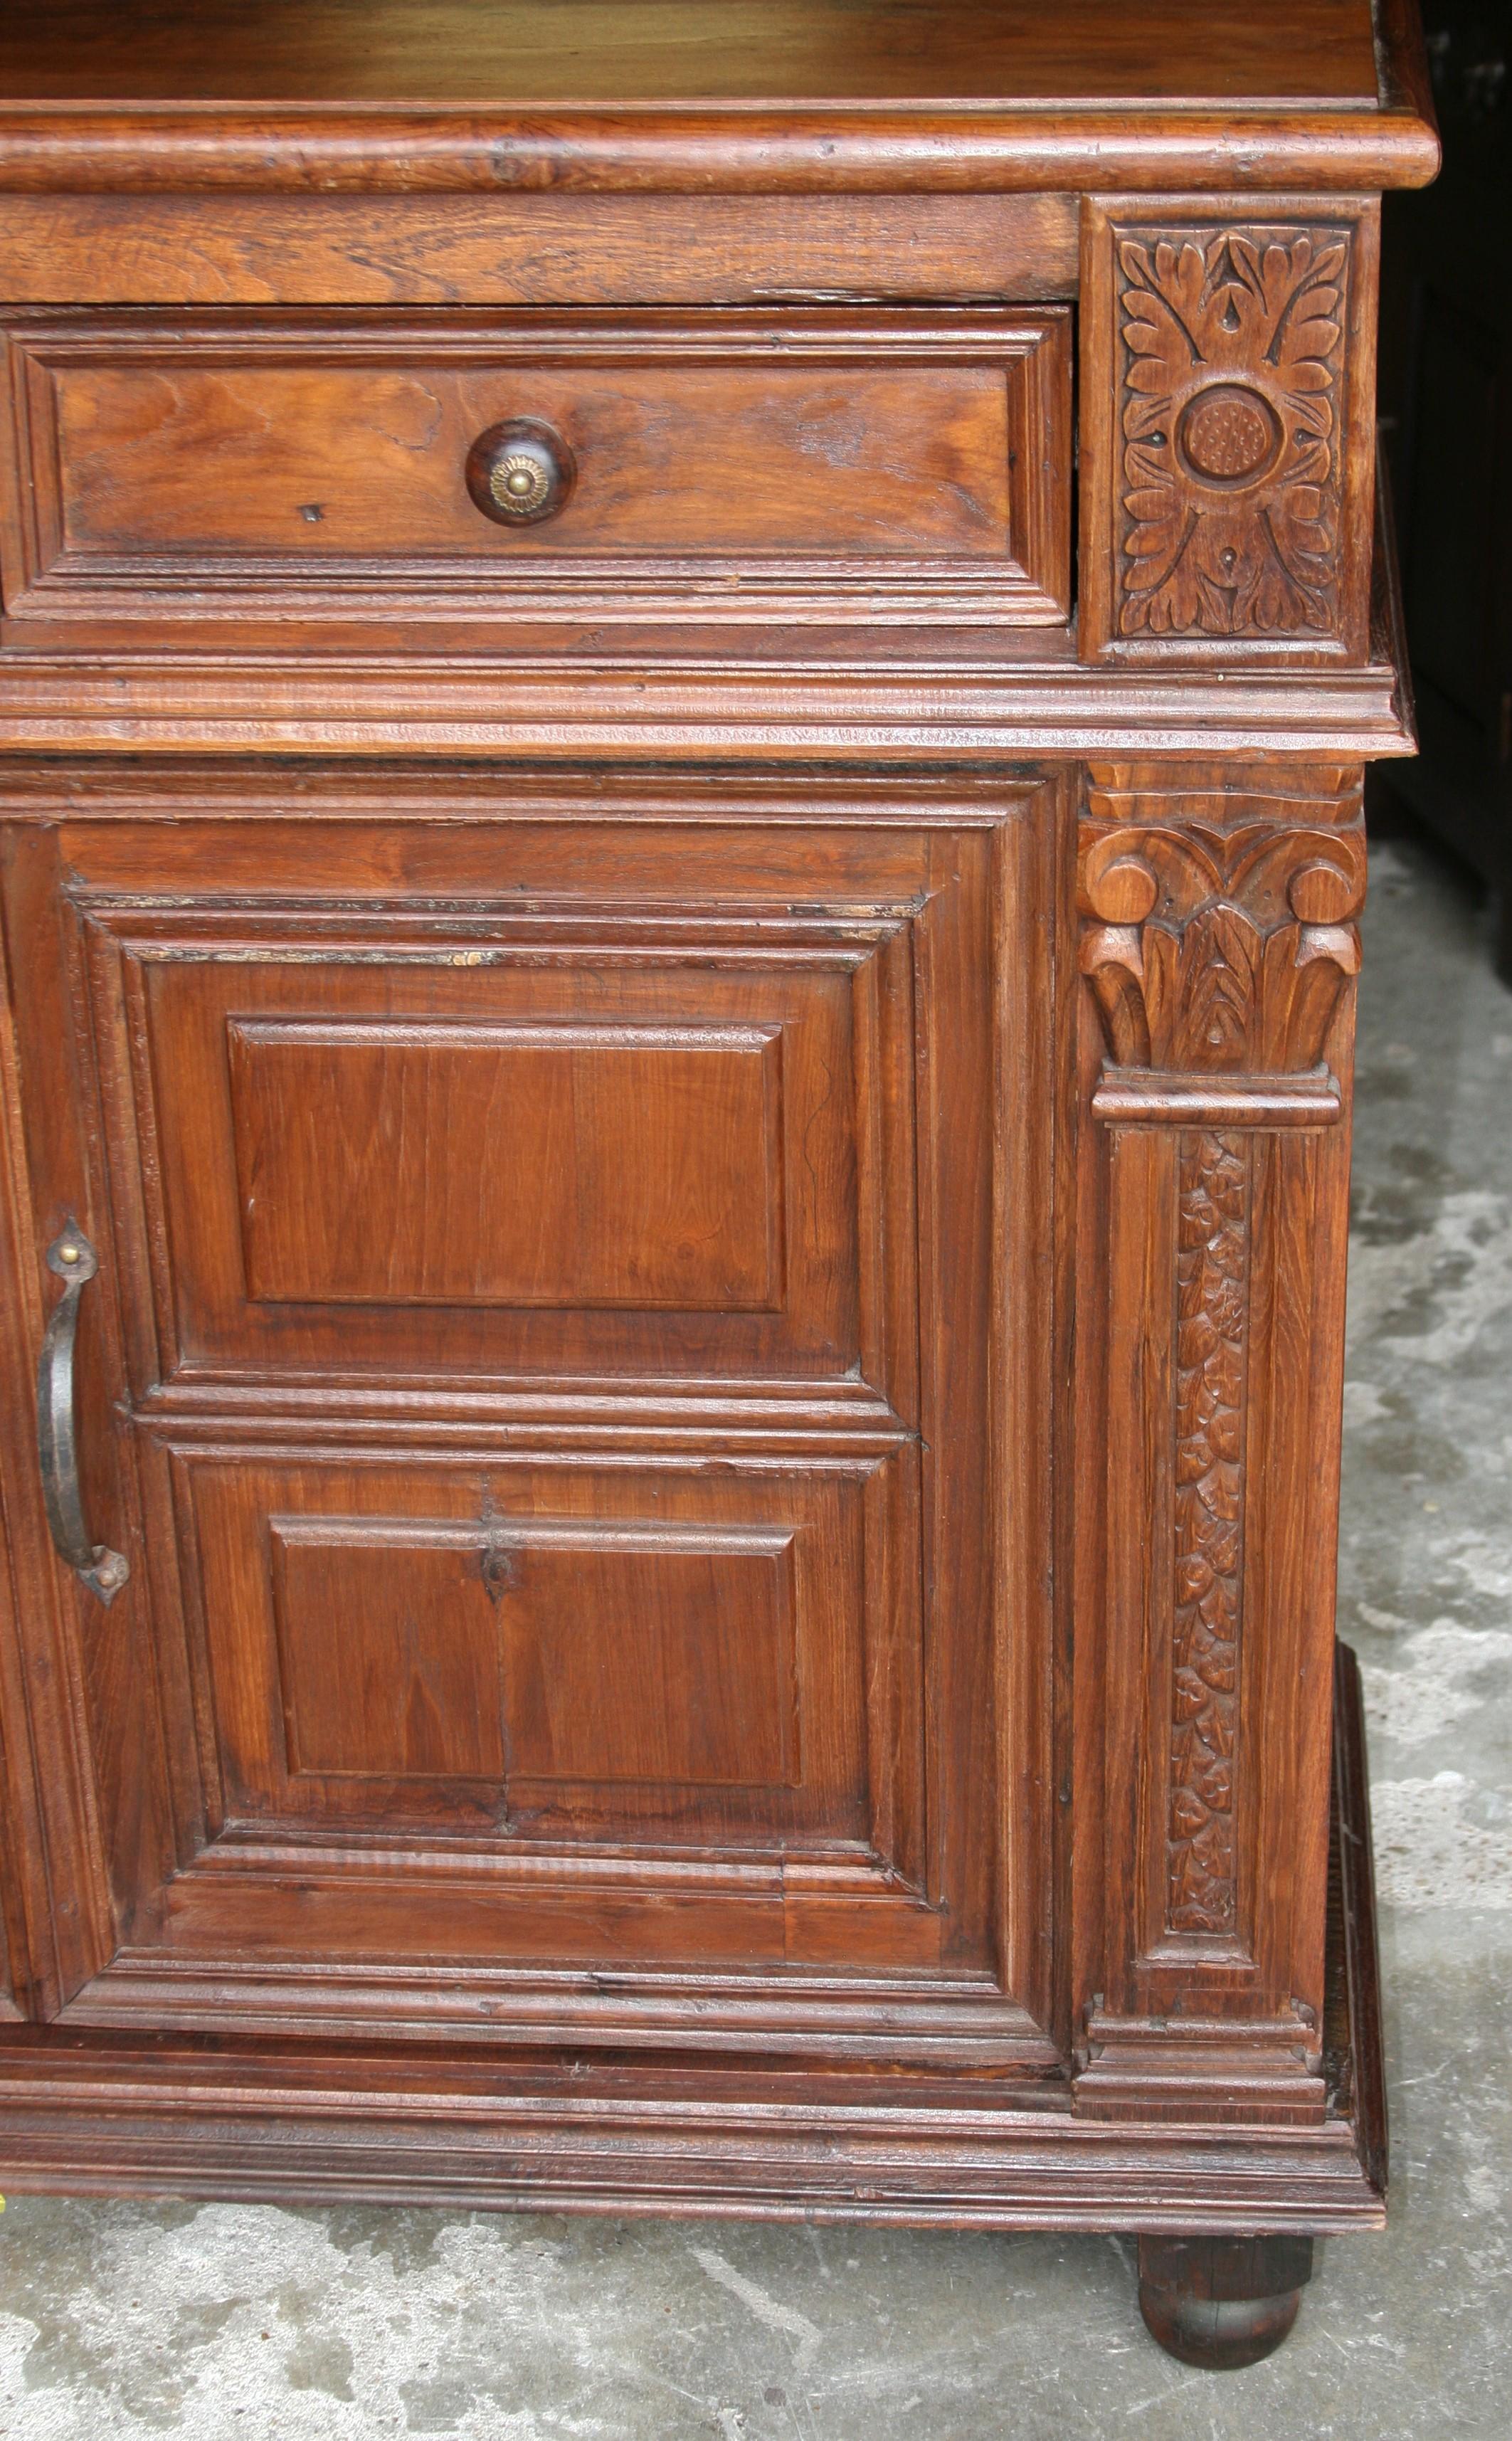 French Provincial 1920s Custom Made Solid Teak Wood Elegant Vanity from a French Colonial Home